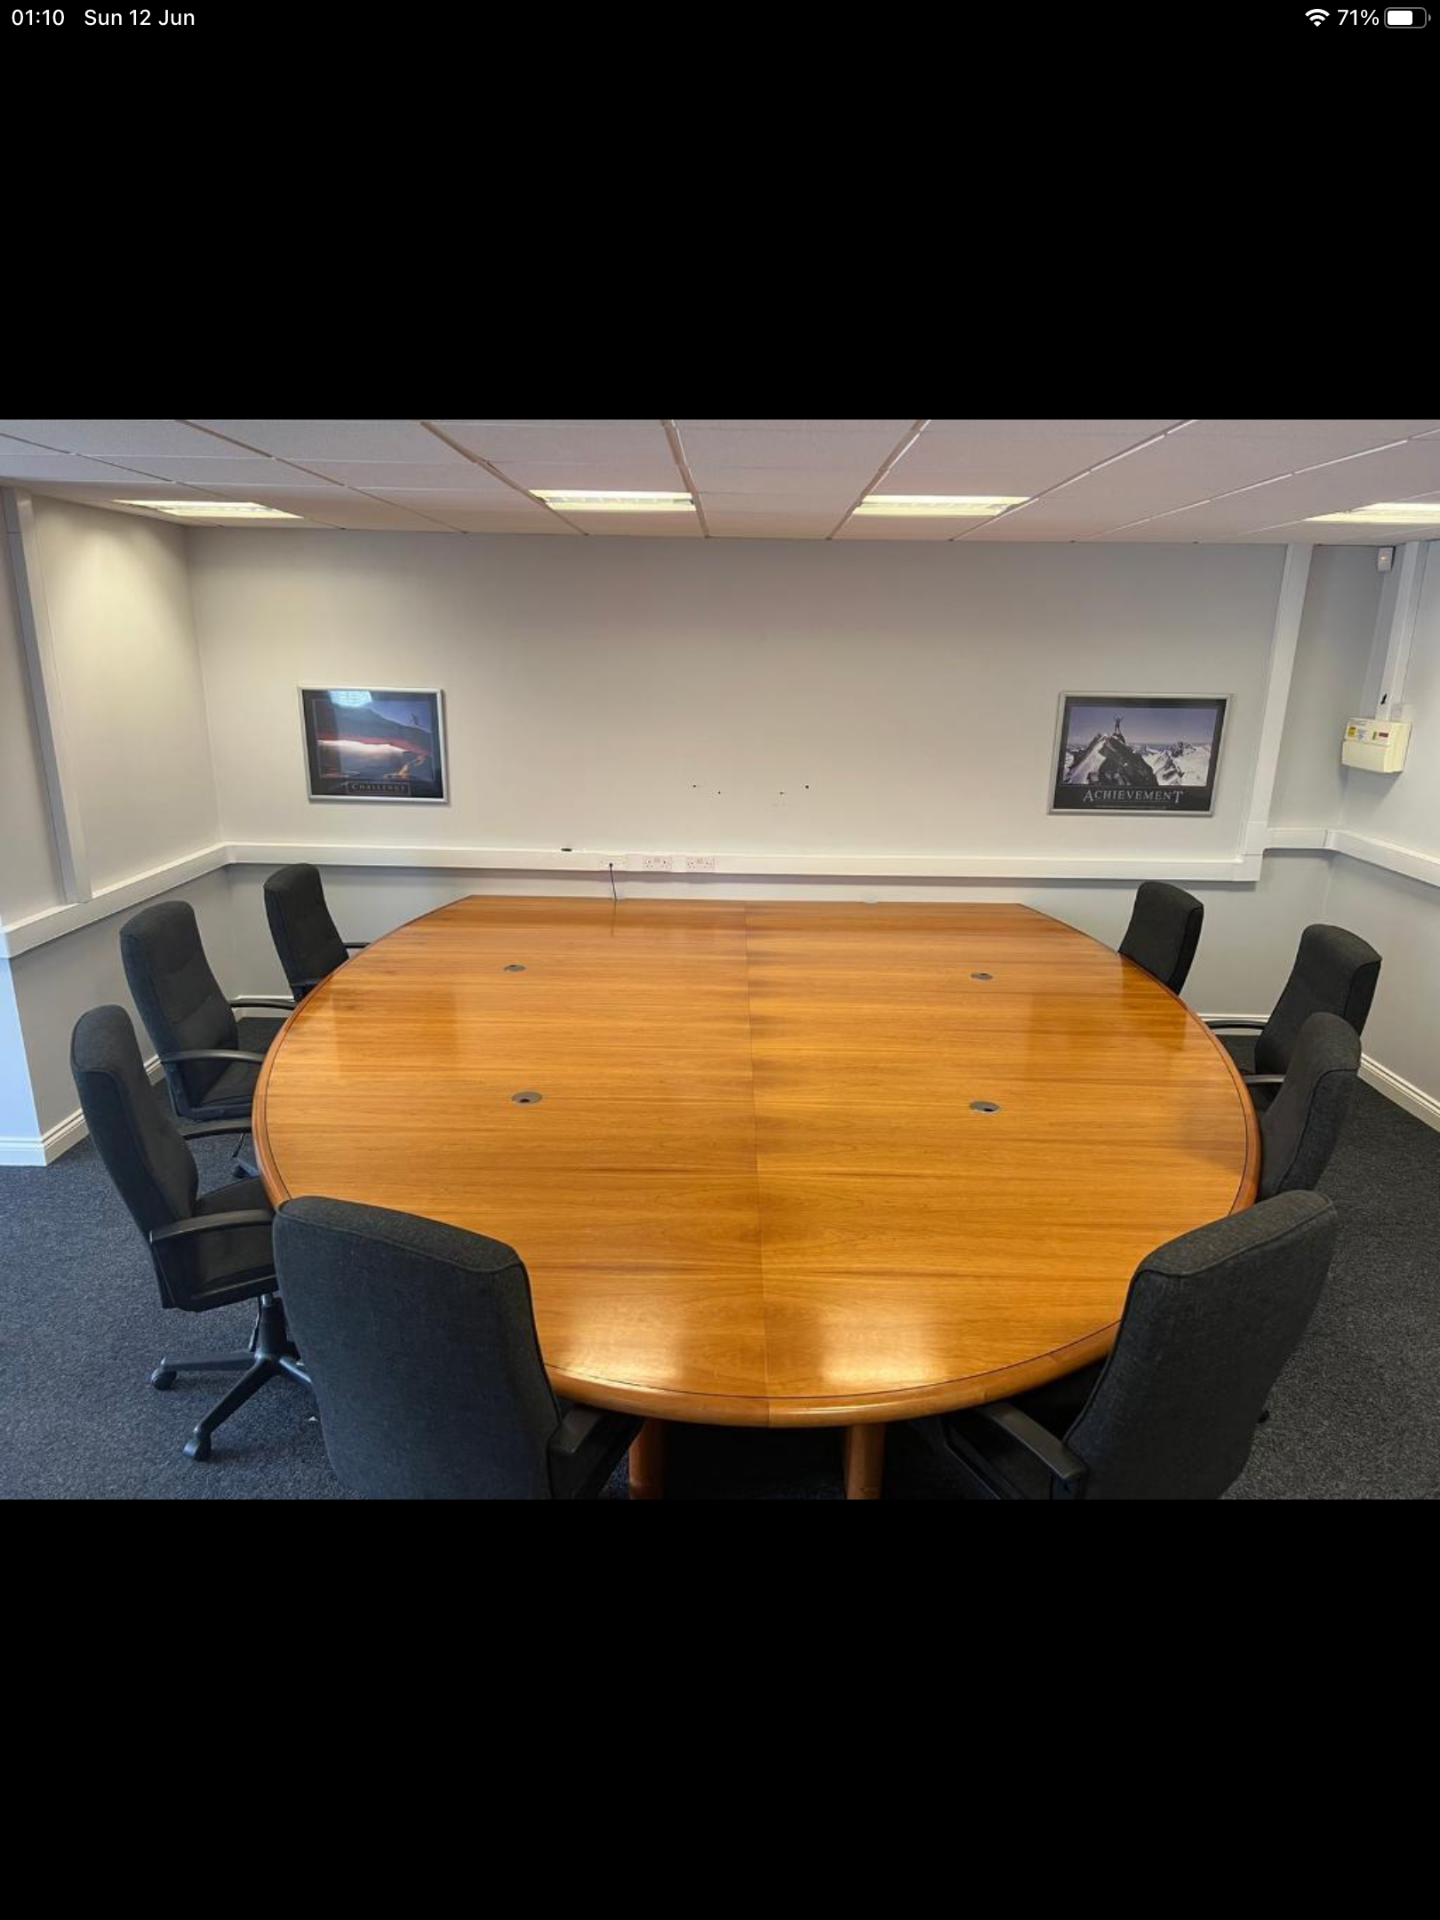 18ft x 11ft Sectional Boardroom Table - Image 2 of 3